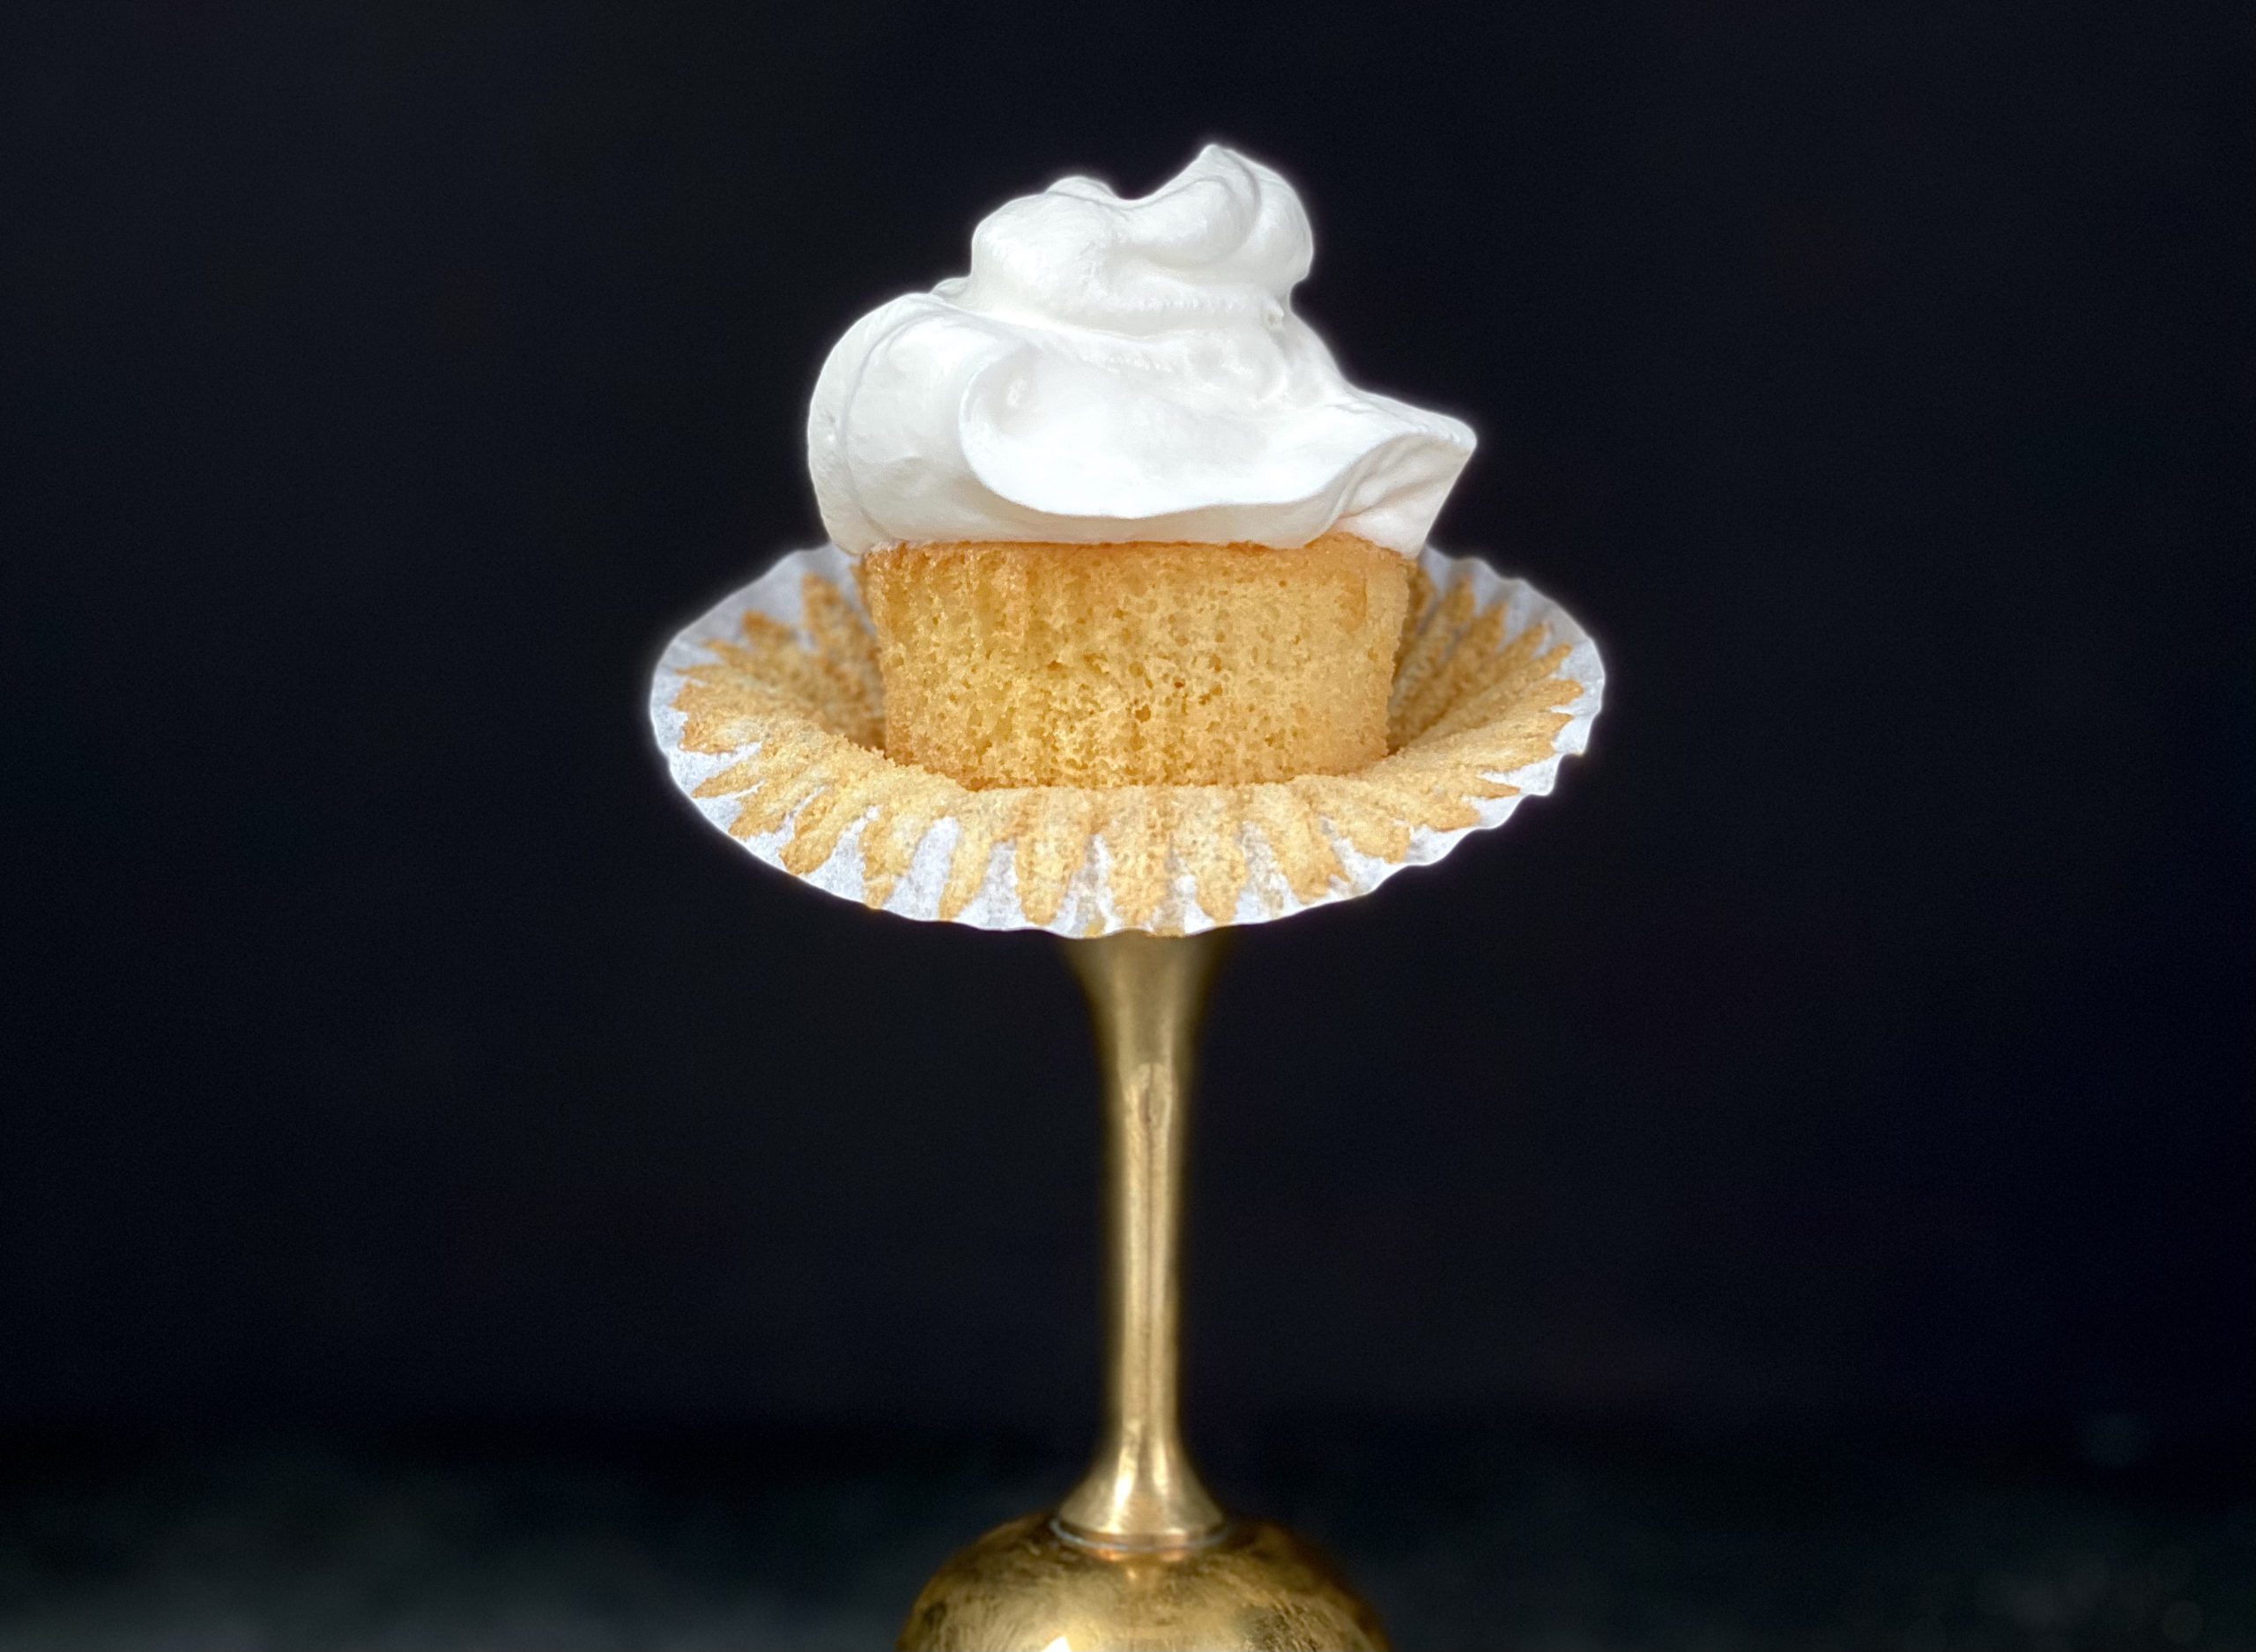 Close-up photograph of chiffon cupcakes, showcasing its light and fluffy texture with a delicate swirl of frosting on top. The cupcakes appear moist and airy, with a golden-brown exterior.